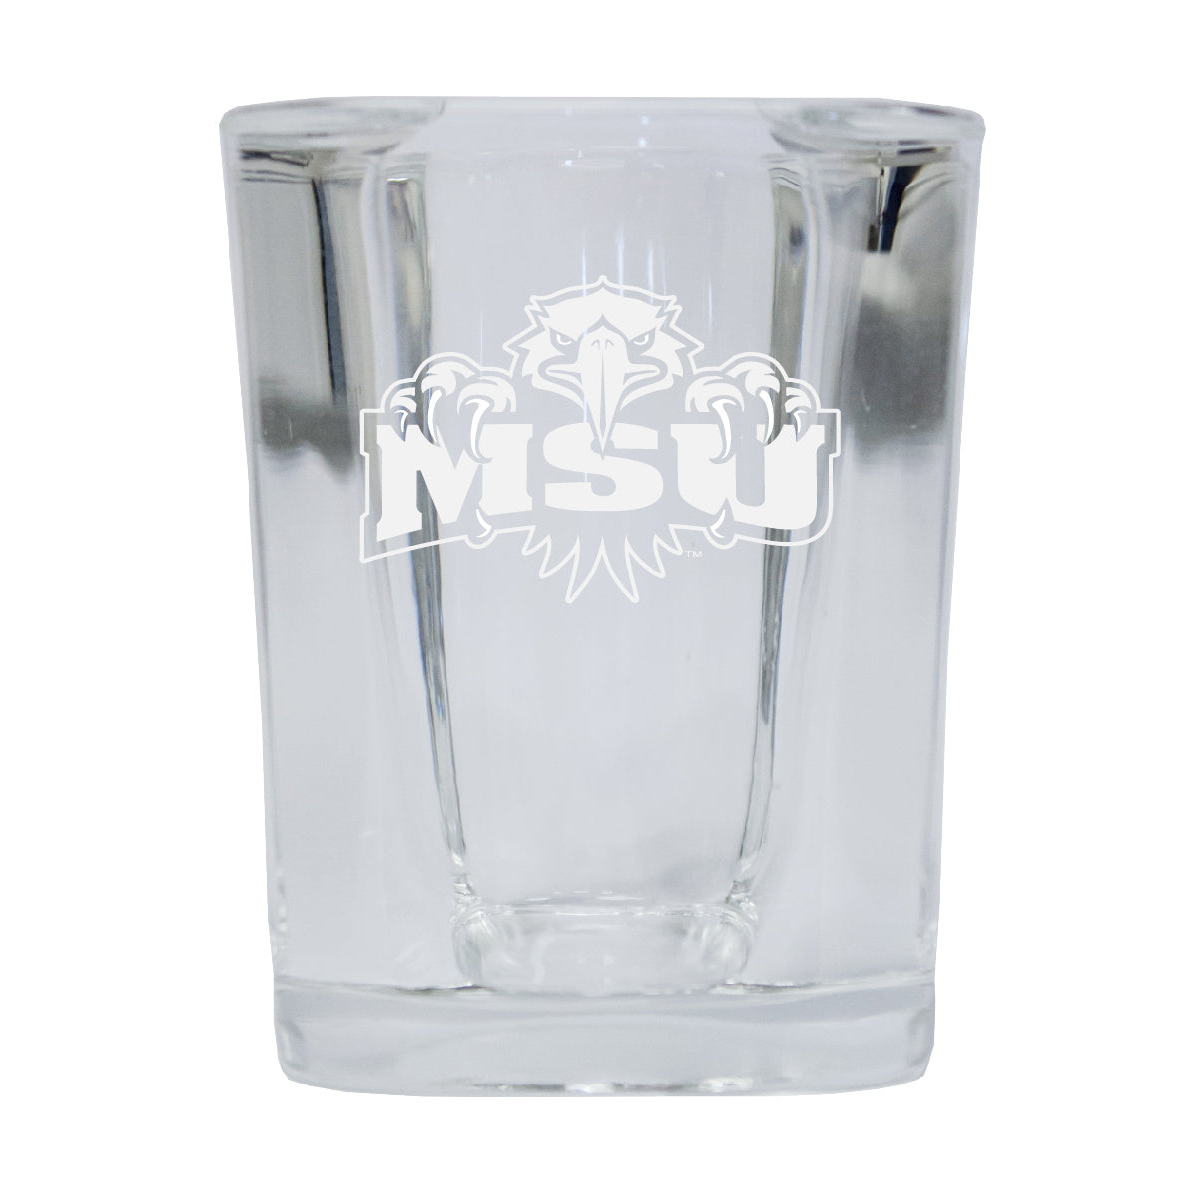 Morehead State University 2 Ounce Square Shot Glass Laser Etched Logo Design